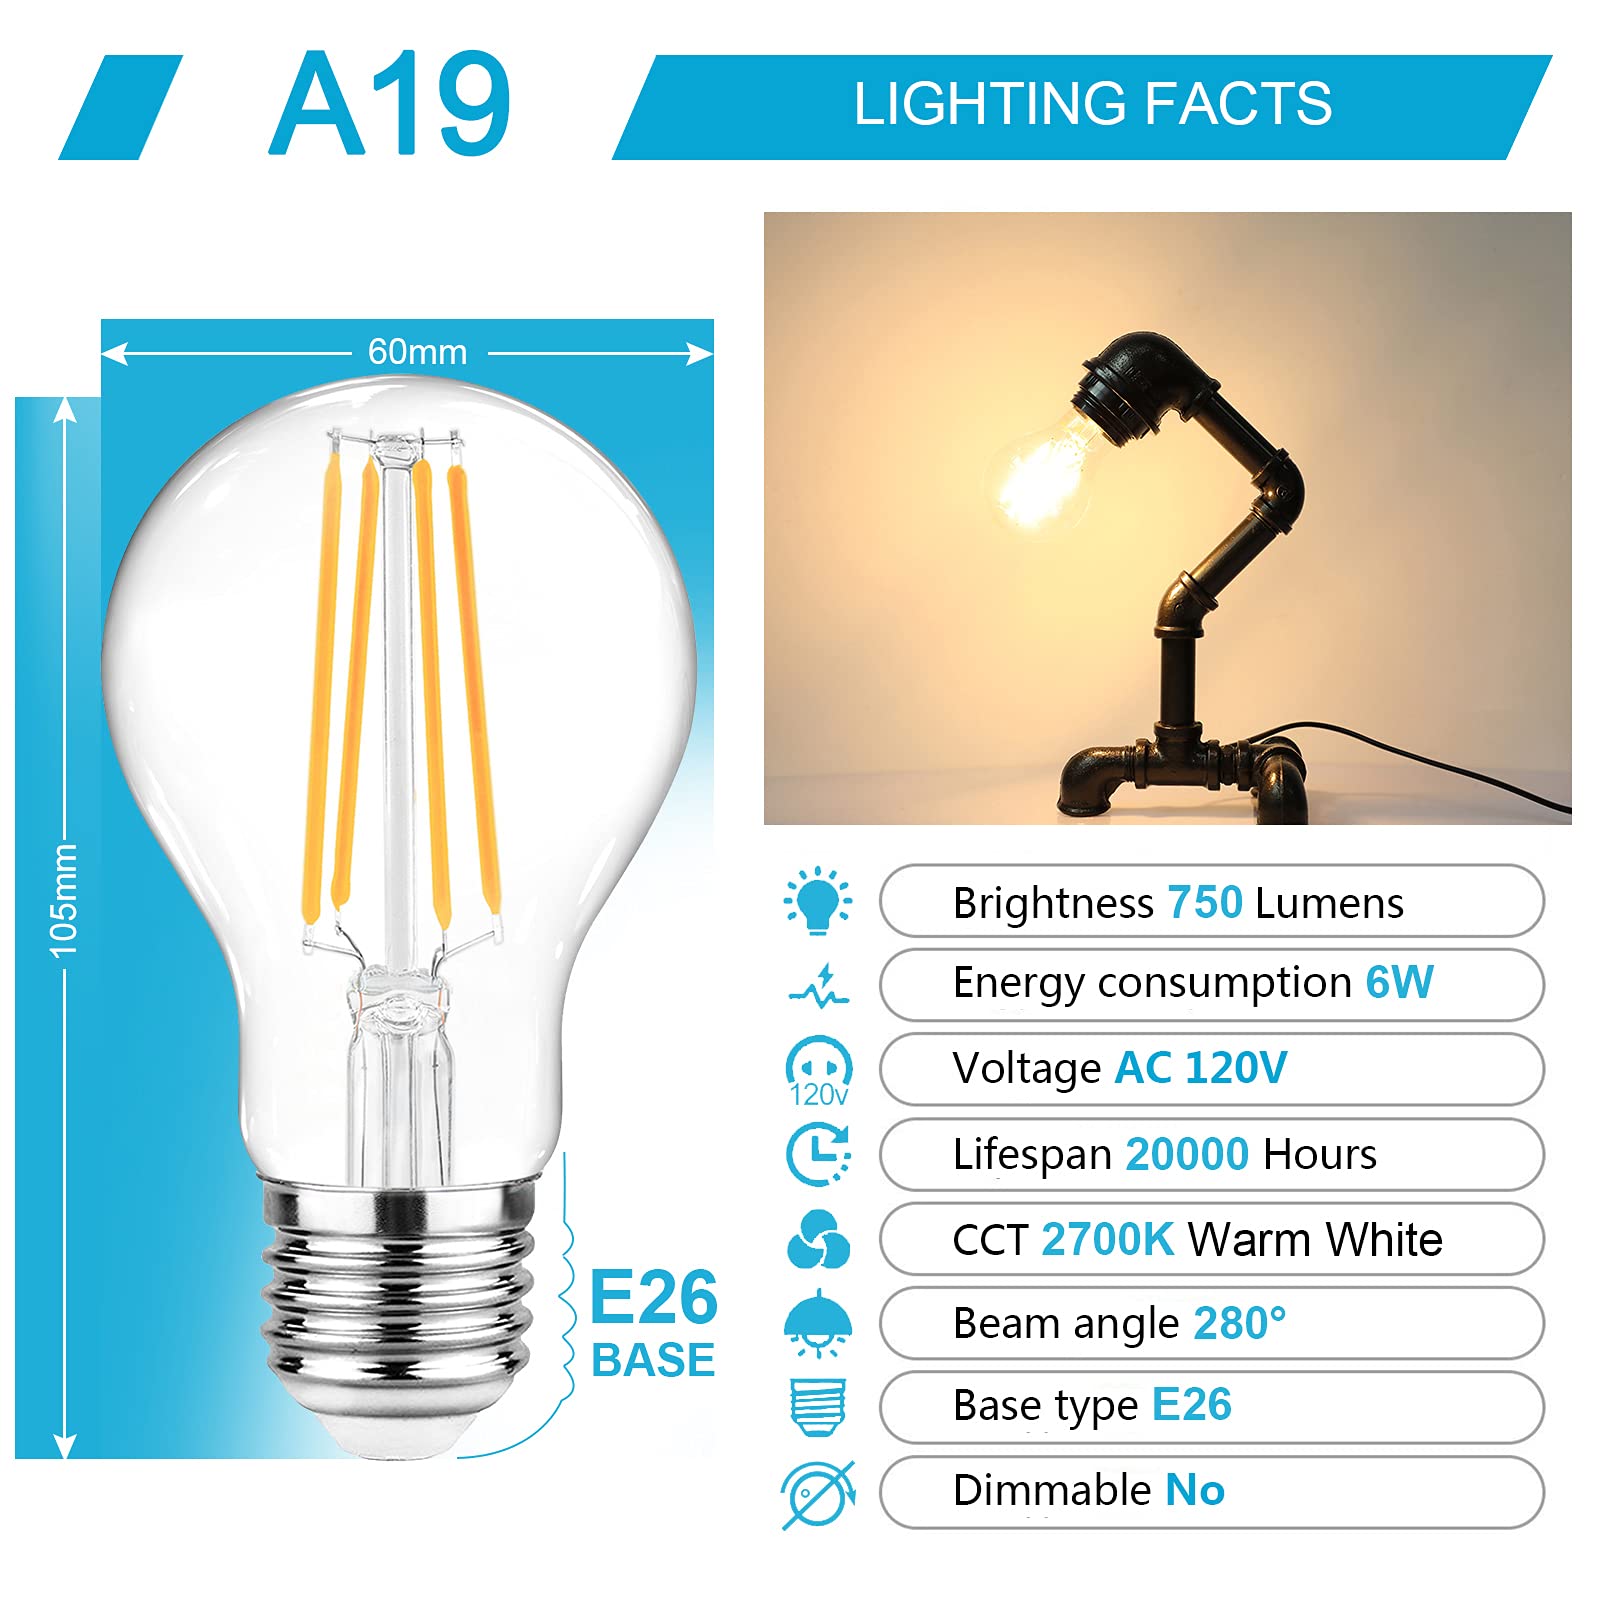 Ascher 60 Watt Equivalent, E26 LED Filament Light Bulbs, Warm White 2700K, Non-Dimmable, Classic Clear Glass, A19 LED Light Bulb with 80+ CRI, 6-Pack